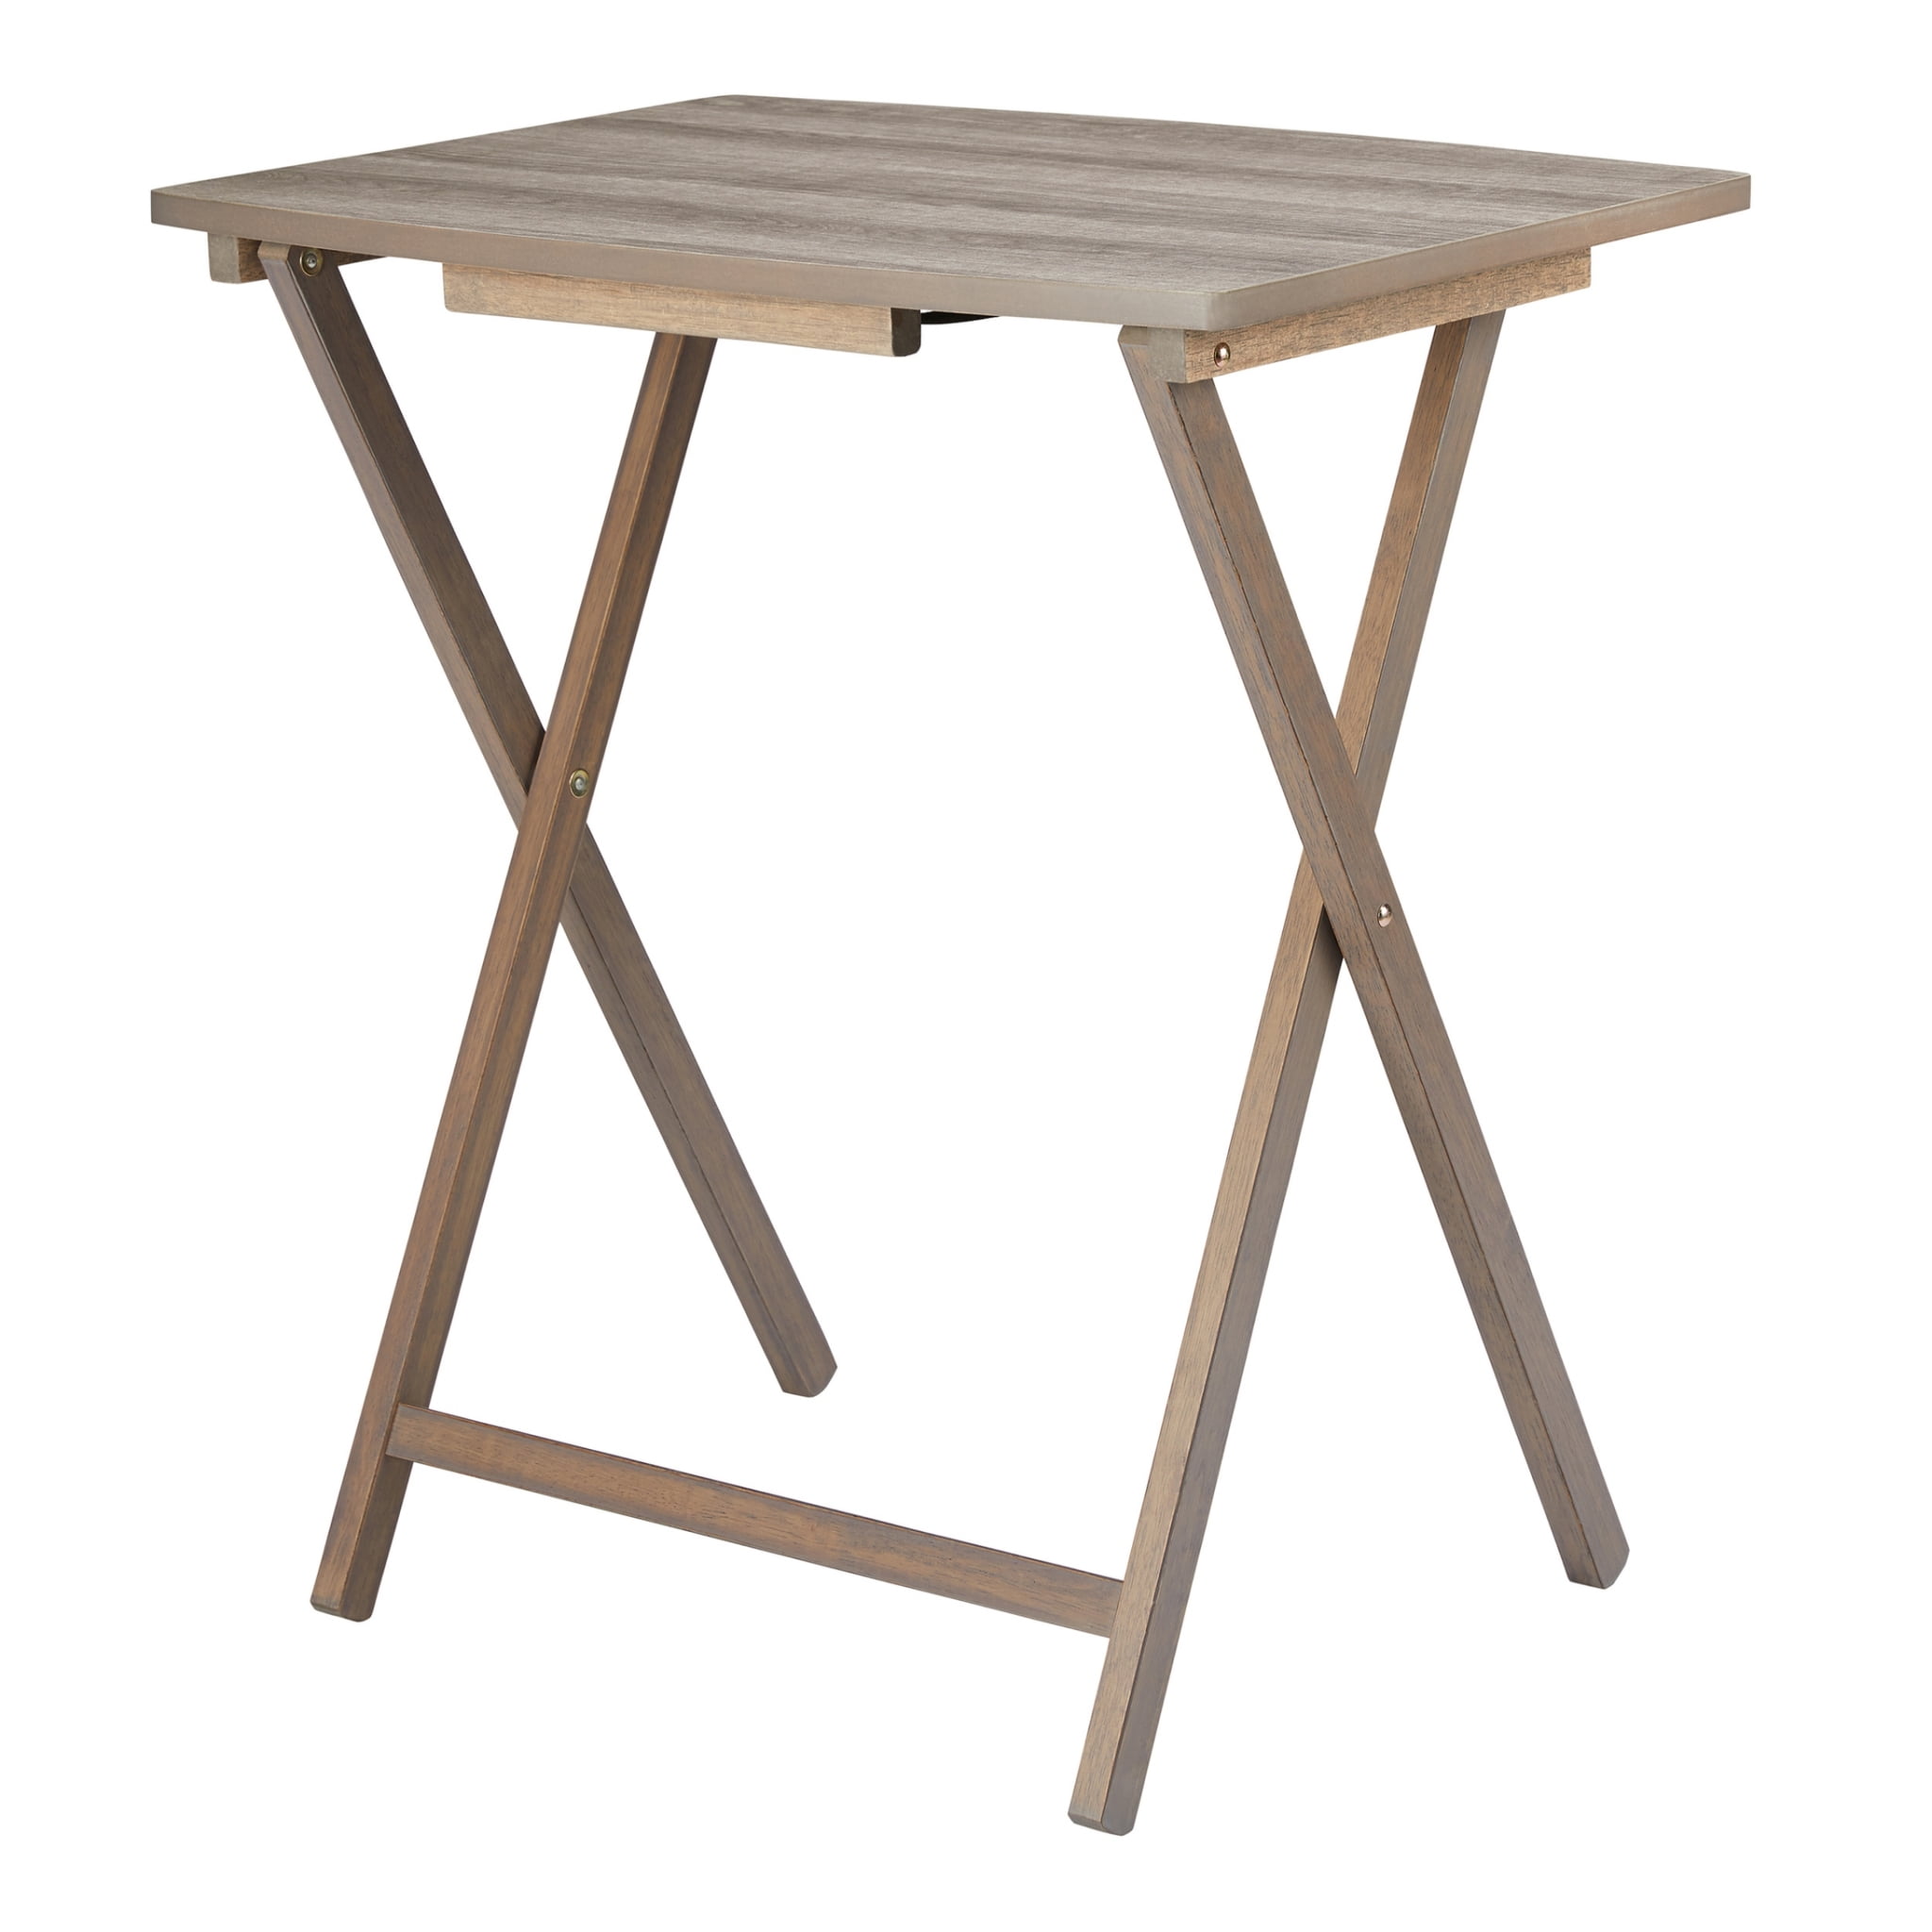 Mainstays Folding Oversized Tray Table - Rustic Gray - 24 x 18 x 26 in